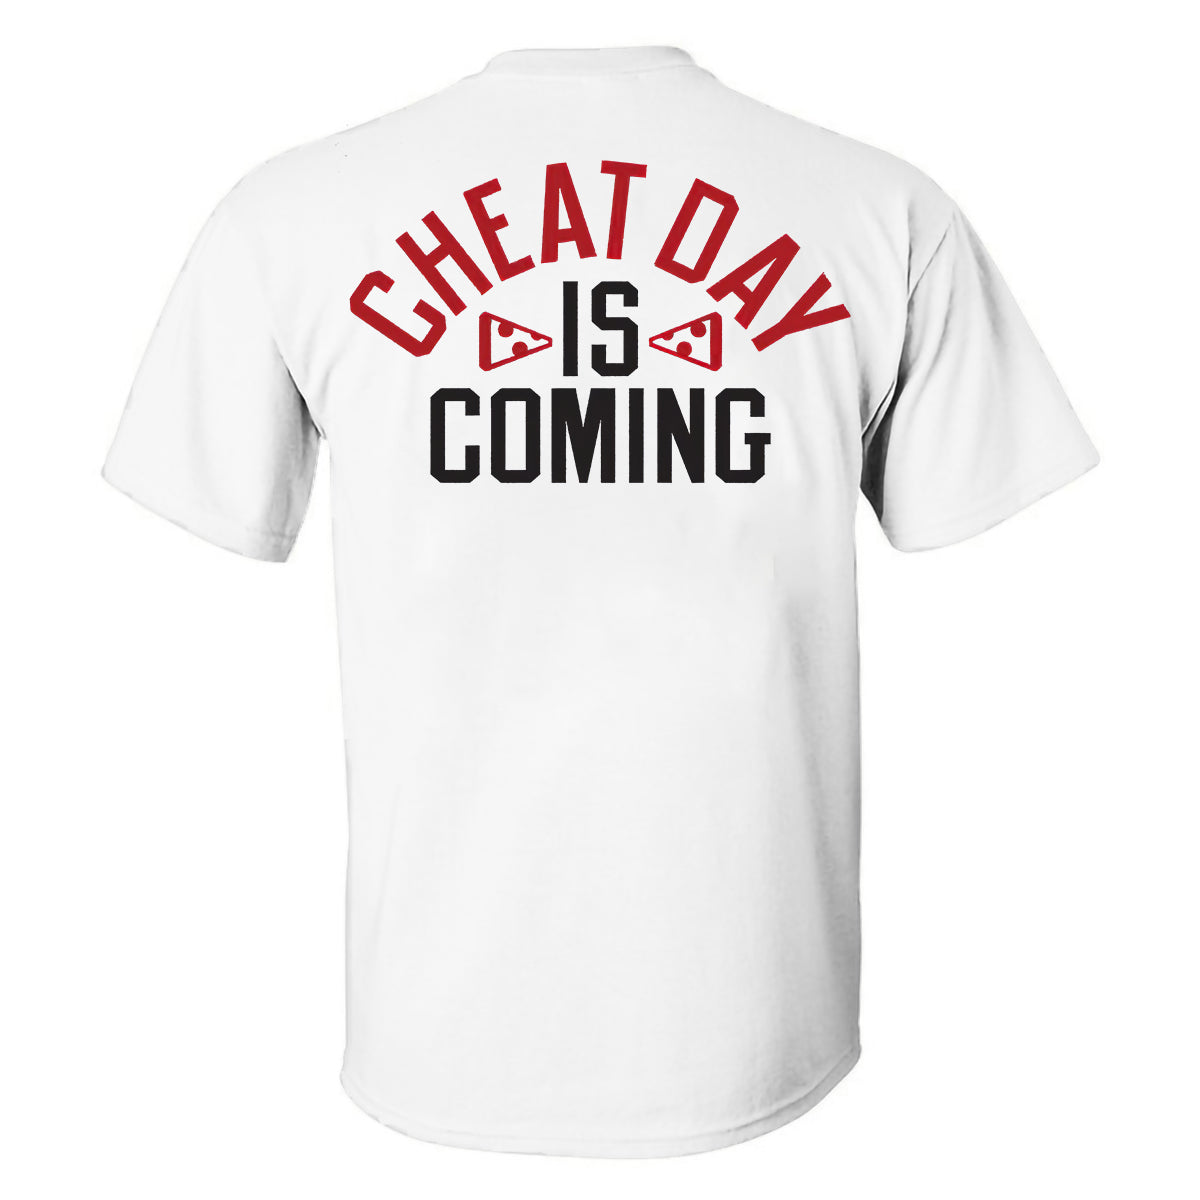 Cheat Day Is Coming Printed Men's T-shirt